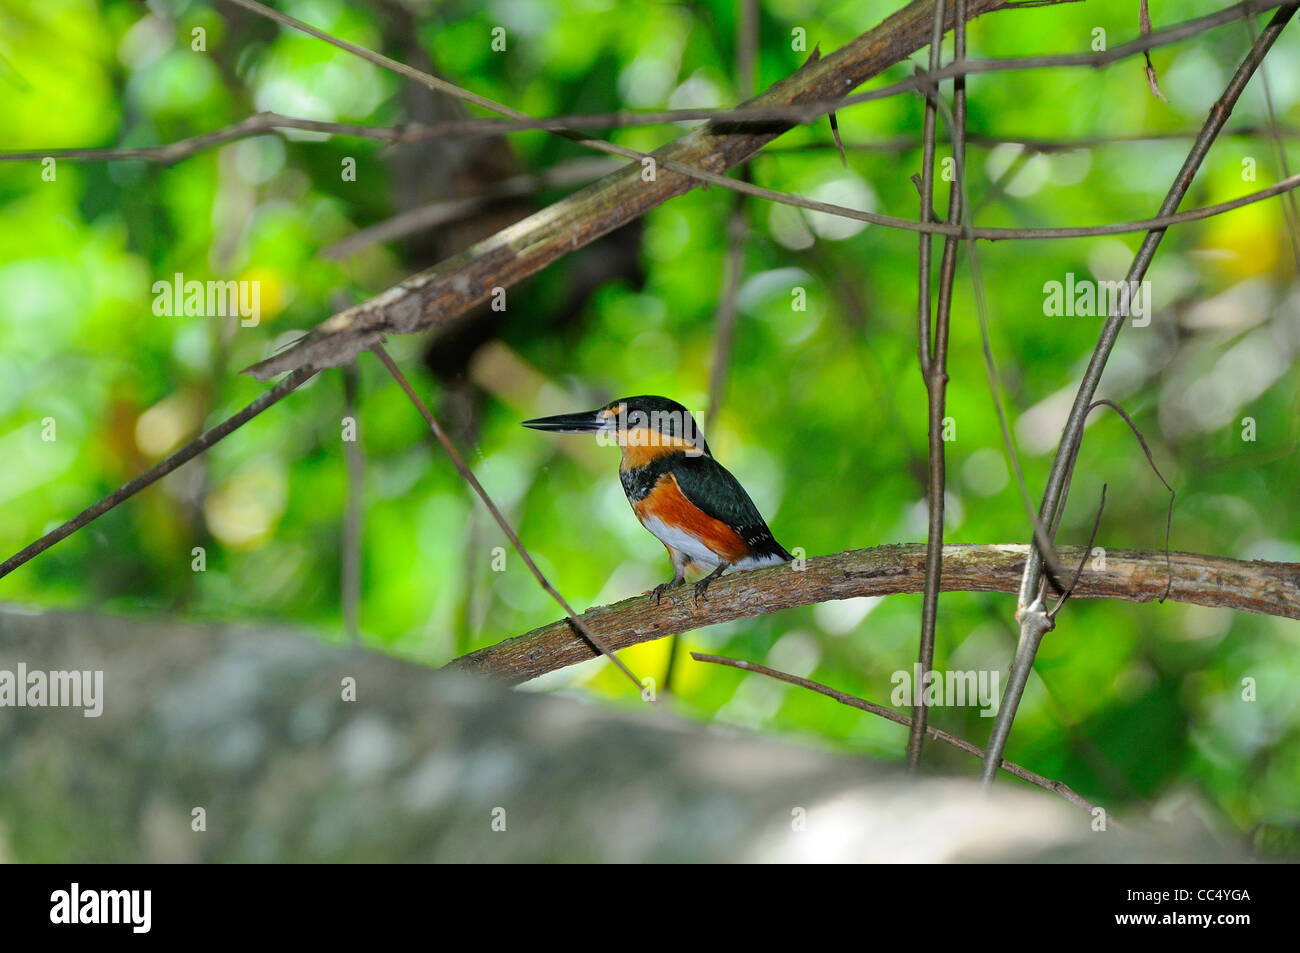 American Pygmy Kingfisher (Chloroceryle aenea) perched in undergrowth, Trinidad Stock Photo